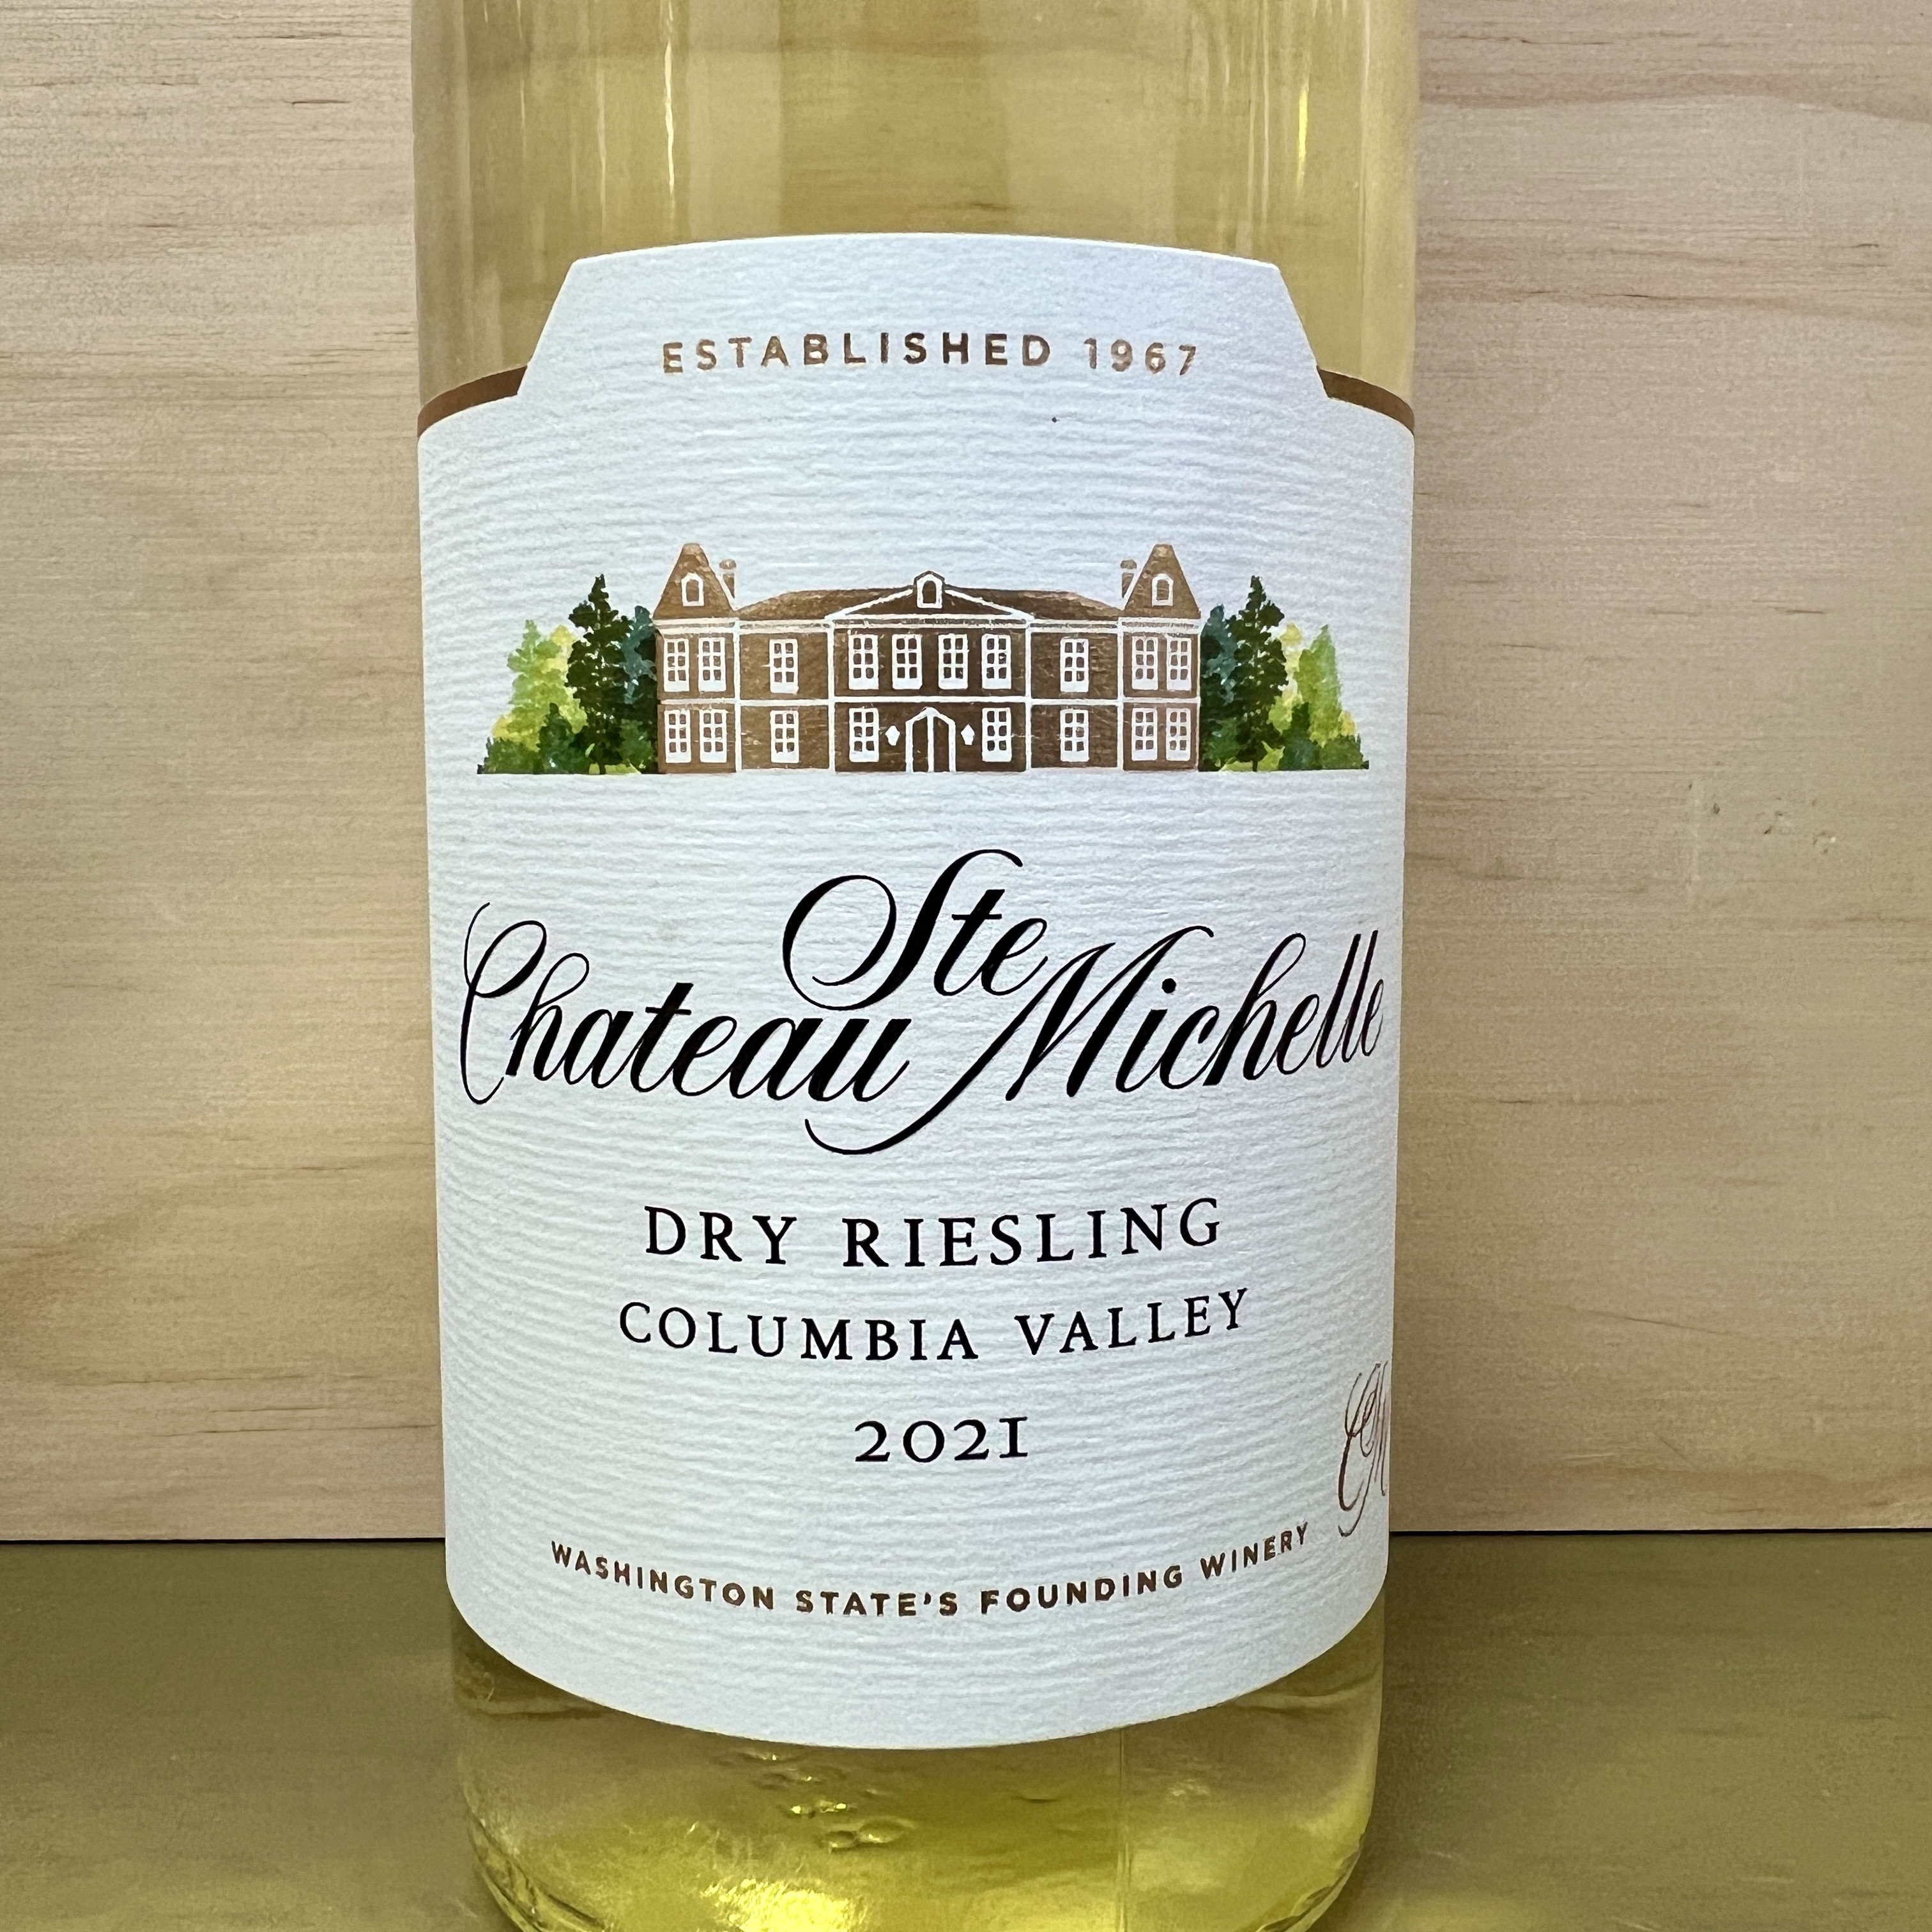 Chateau Ste Michelle Dry Riesling Columbia Valley 2021